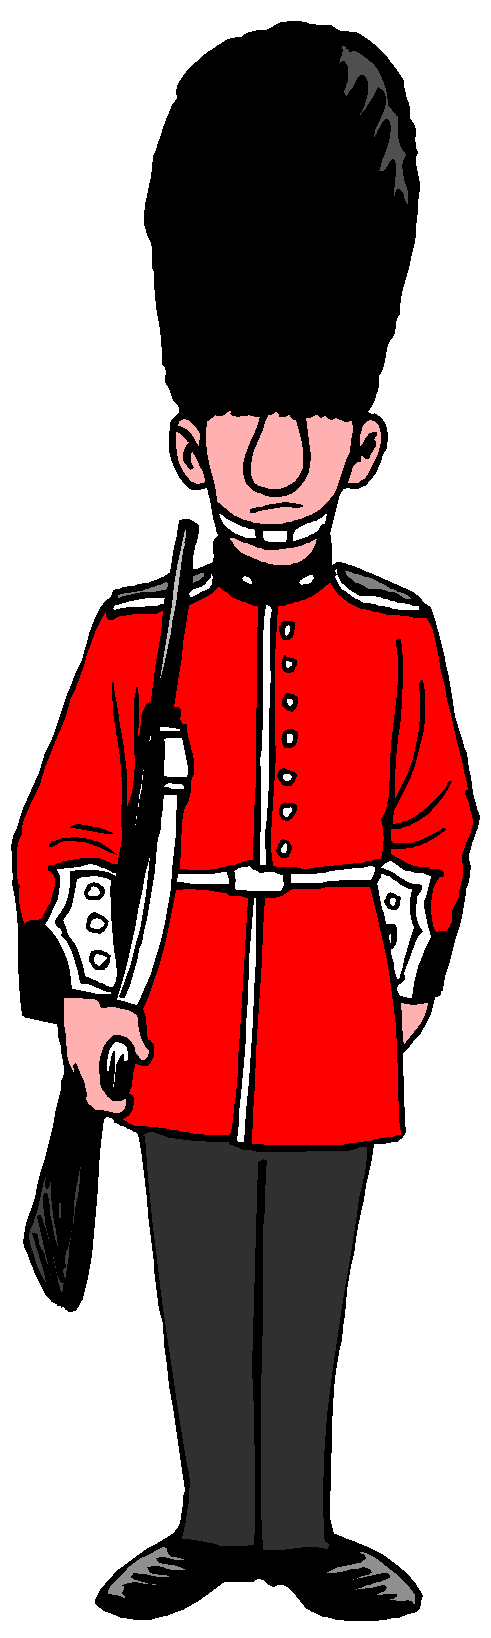 London clipart guards, London guards Transparent FREE for download on